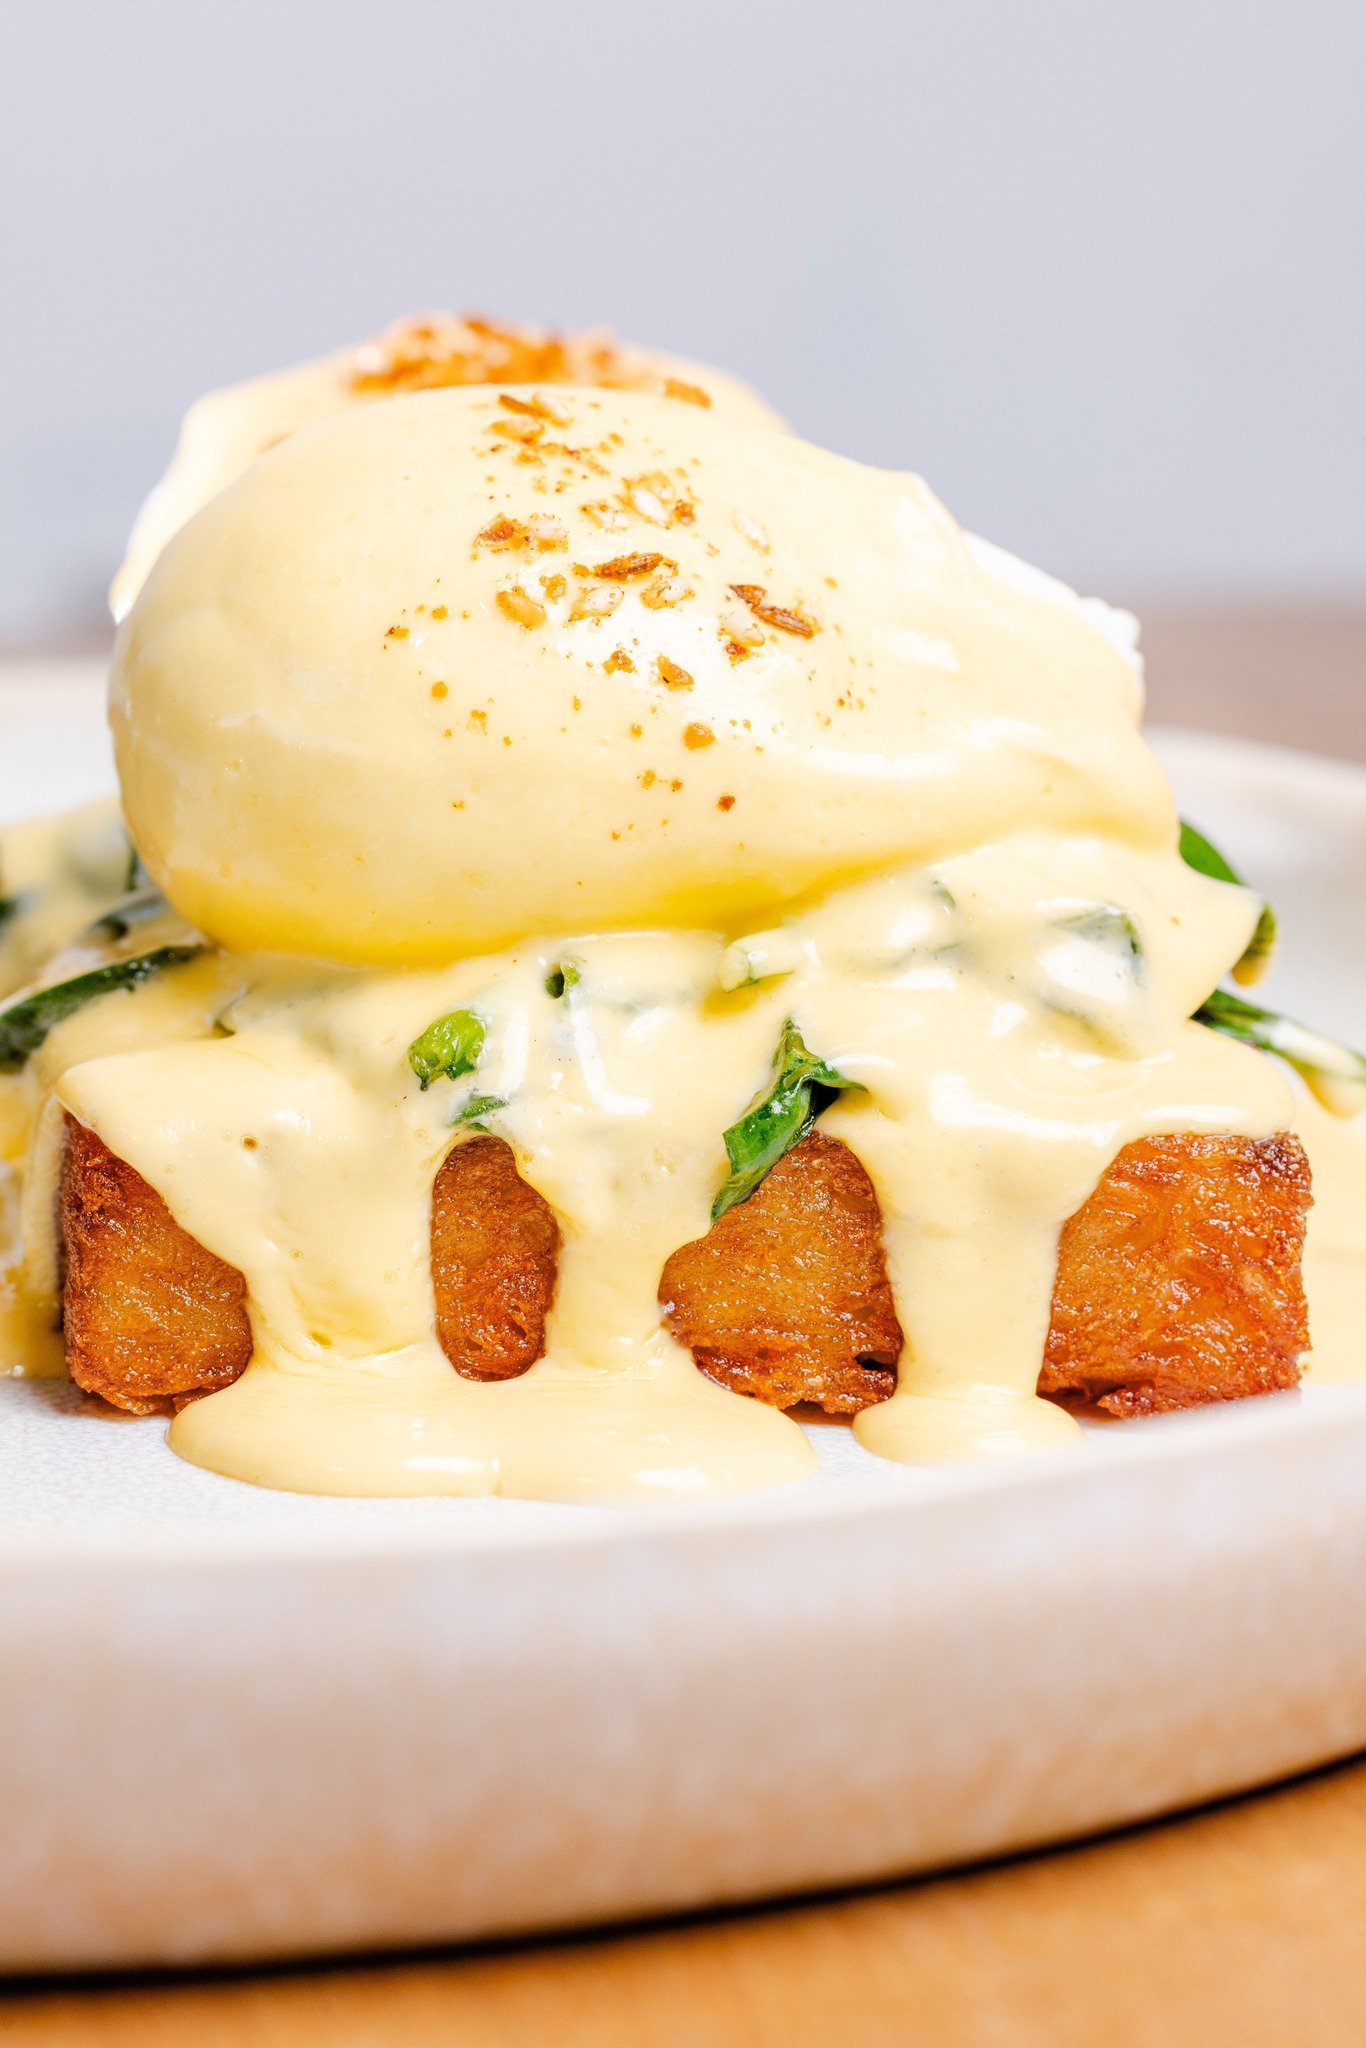 Sunday calls for a crispy hash brown benny. Just choose your own adventure with bacon, steak, smoked salmon + more!